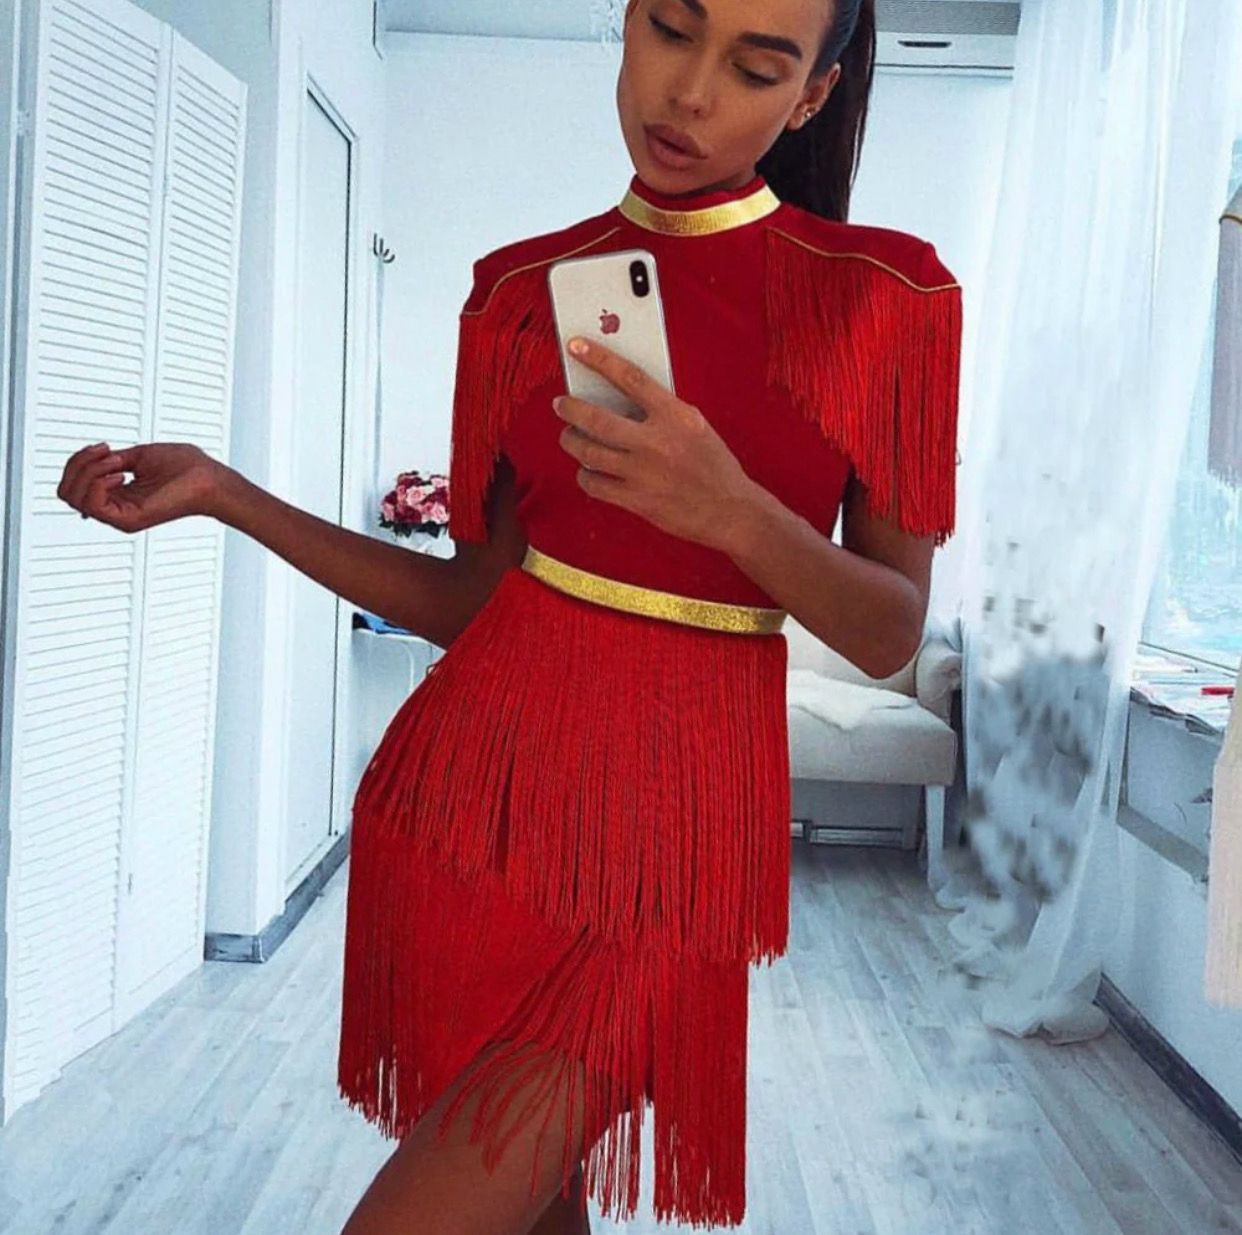 NEXT DAY DELIVERY DAMIANA  Red Round Neck Short Sleeve Tassels Bandage Dress